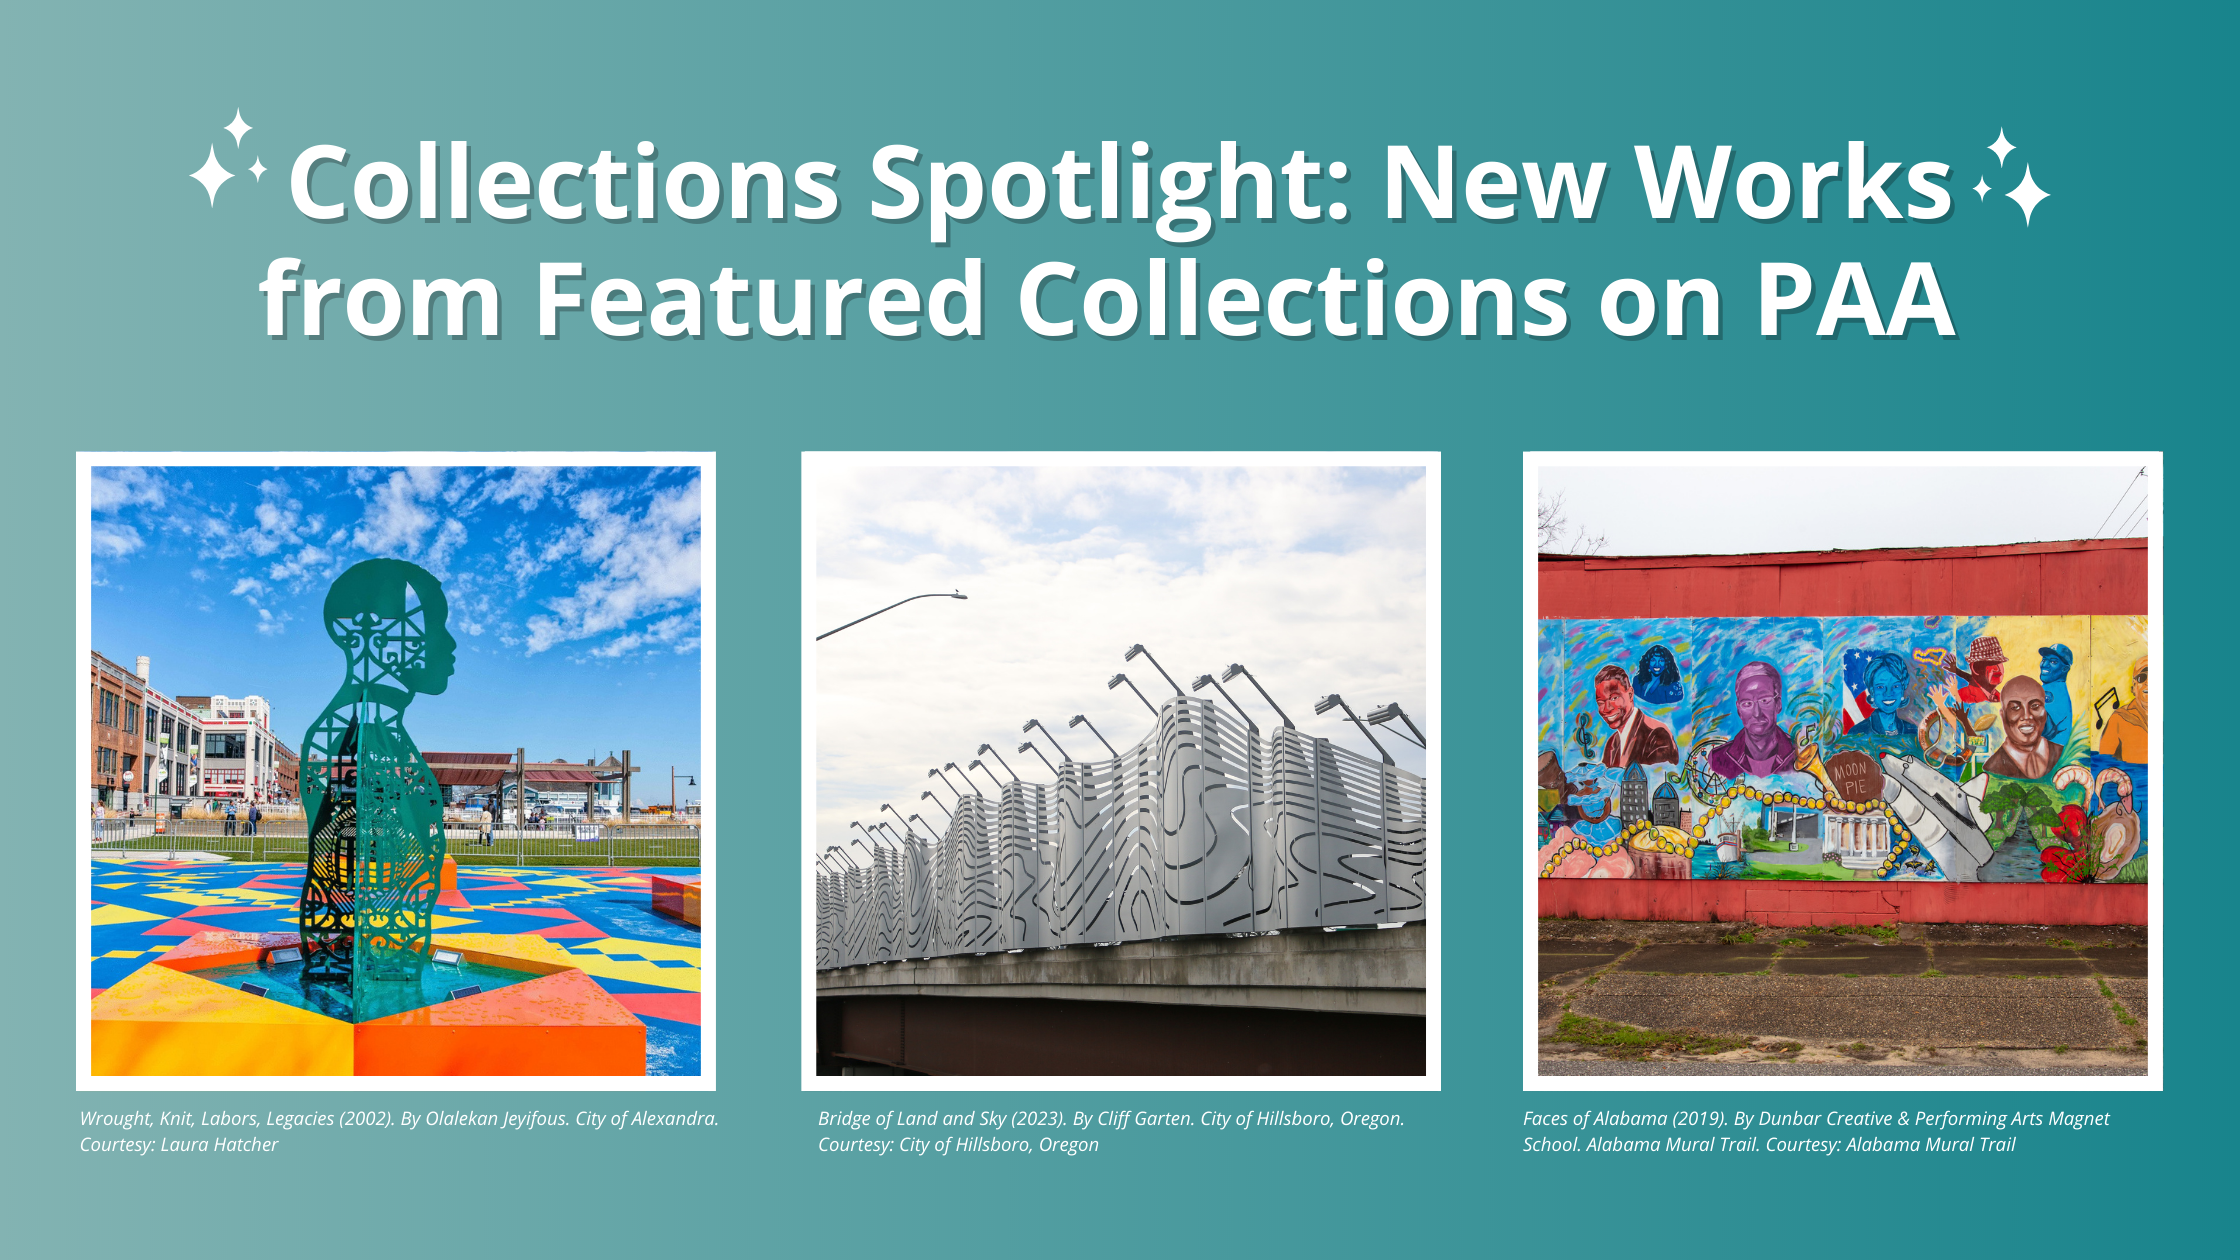 Collections Spotlight: New Works from Featured Collections on PAA